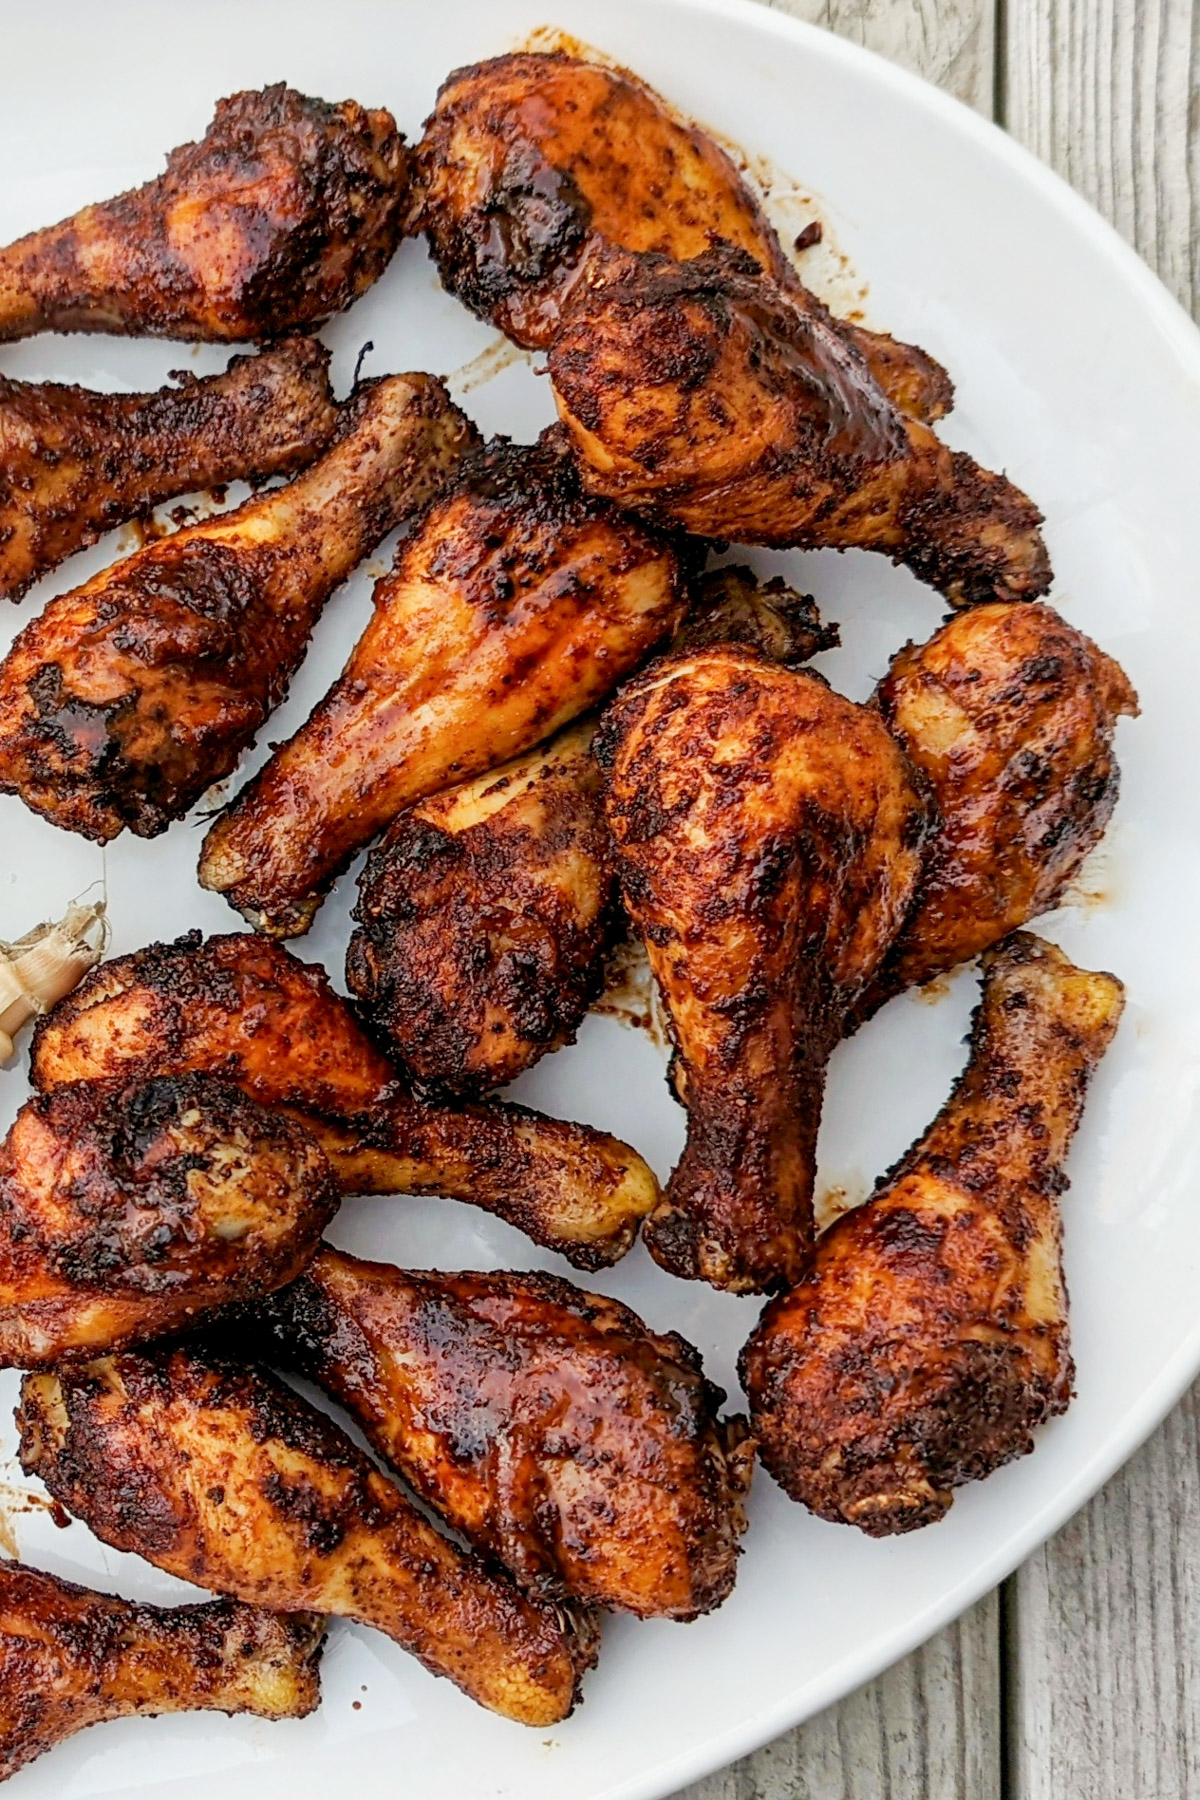 BBQ Baked Chicken Legs on a platter with corn.